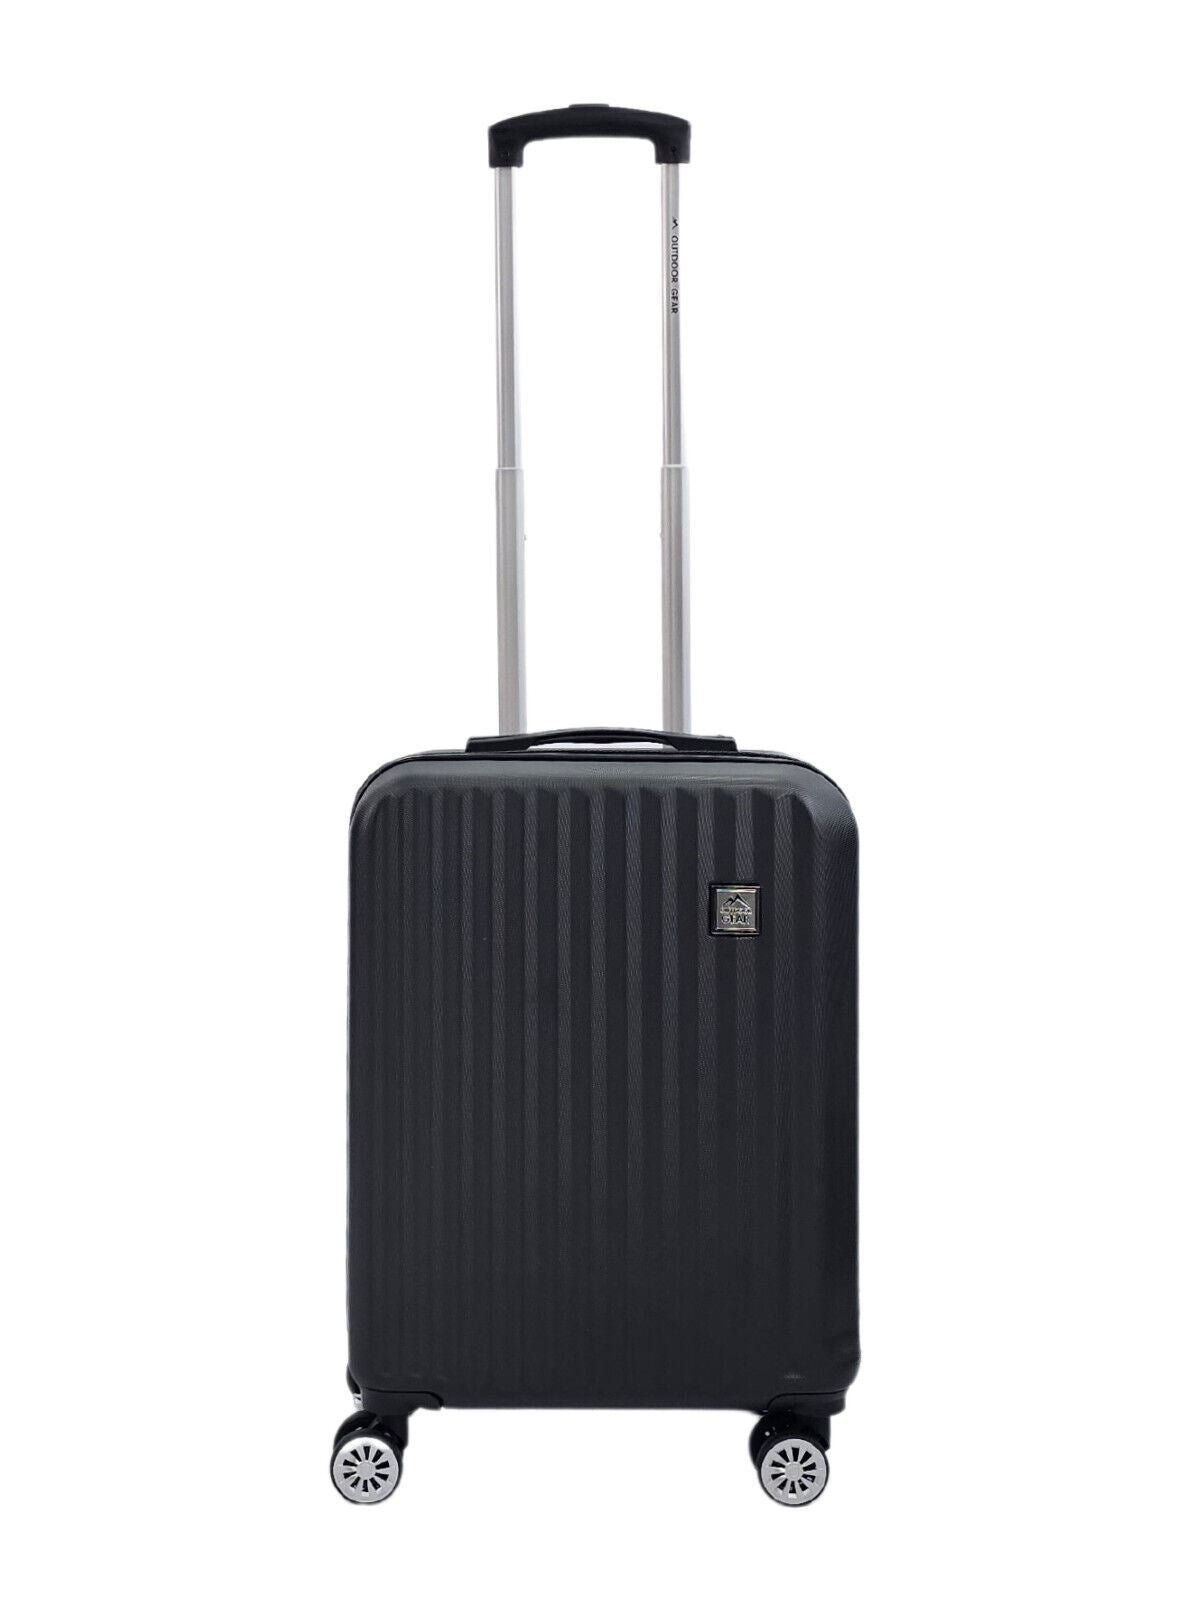 Hard Shell Classic Suitcase 8 Wheel Cabin Luggage Holiday Travel